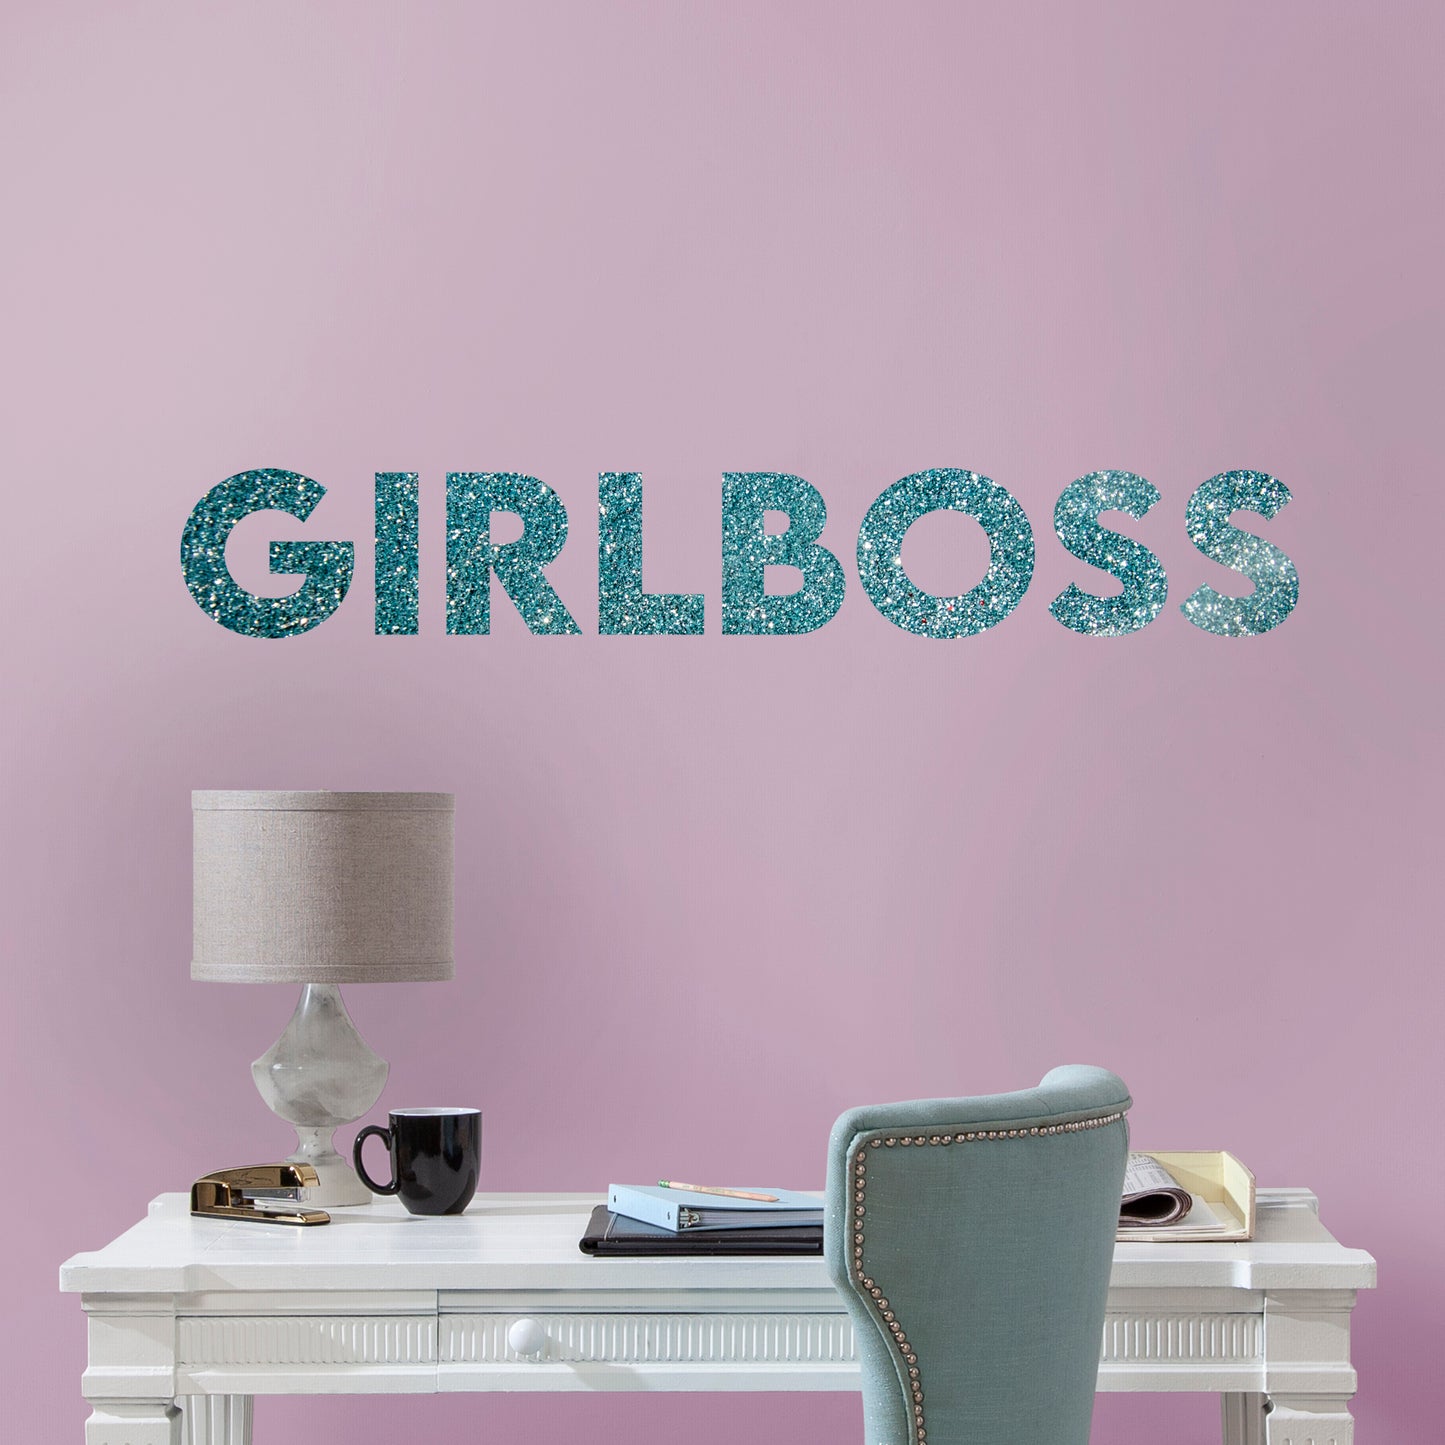 Pre-mask Girl Boss  - Removable Wall Decal